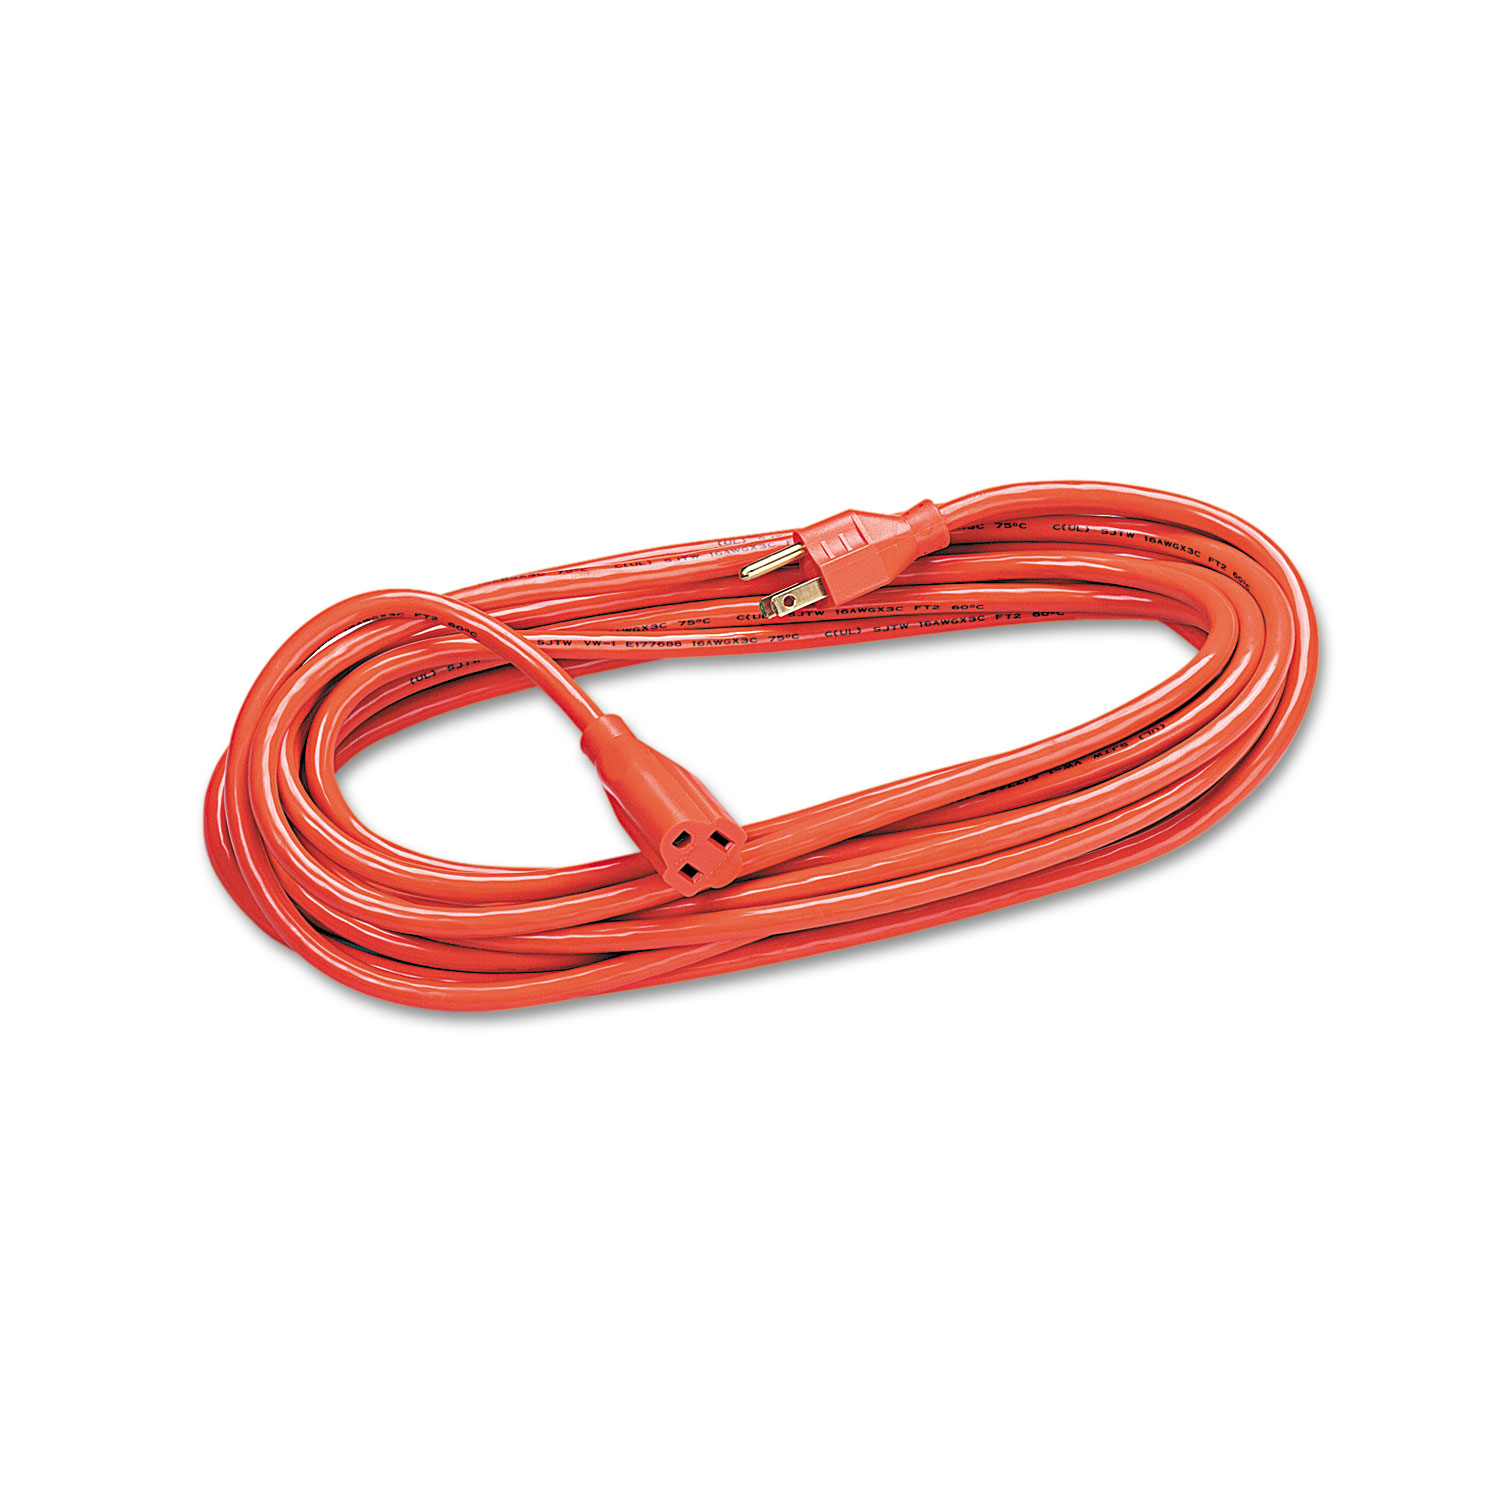 Indoor/Outdoor Heavy-Duty 3-Prong Plug Extension Cord, 1-Outlet, 25ft, Orange